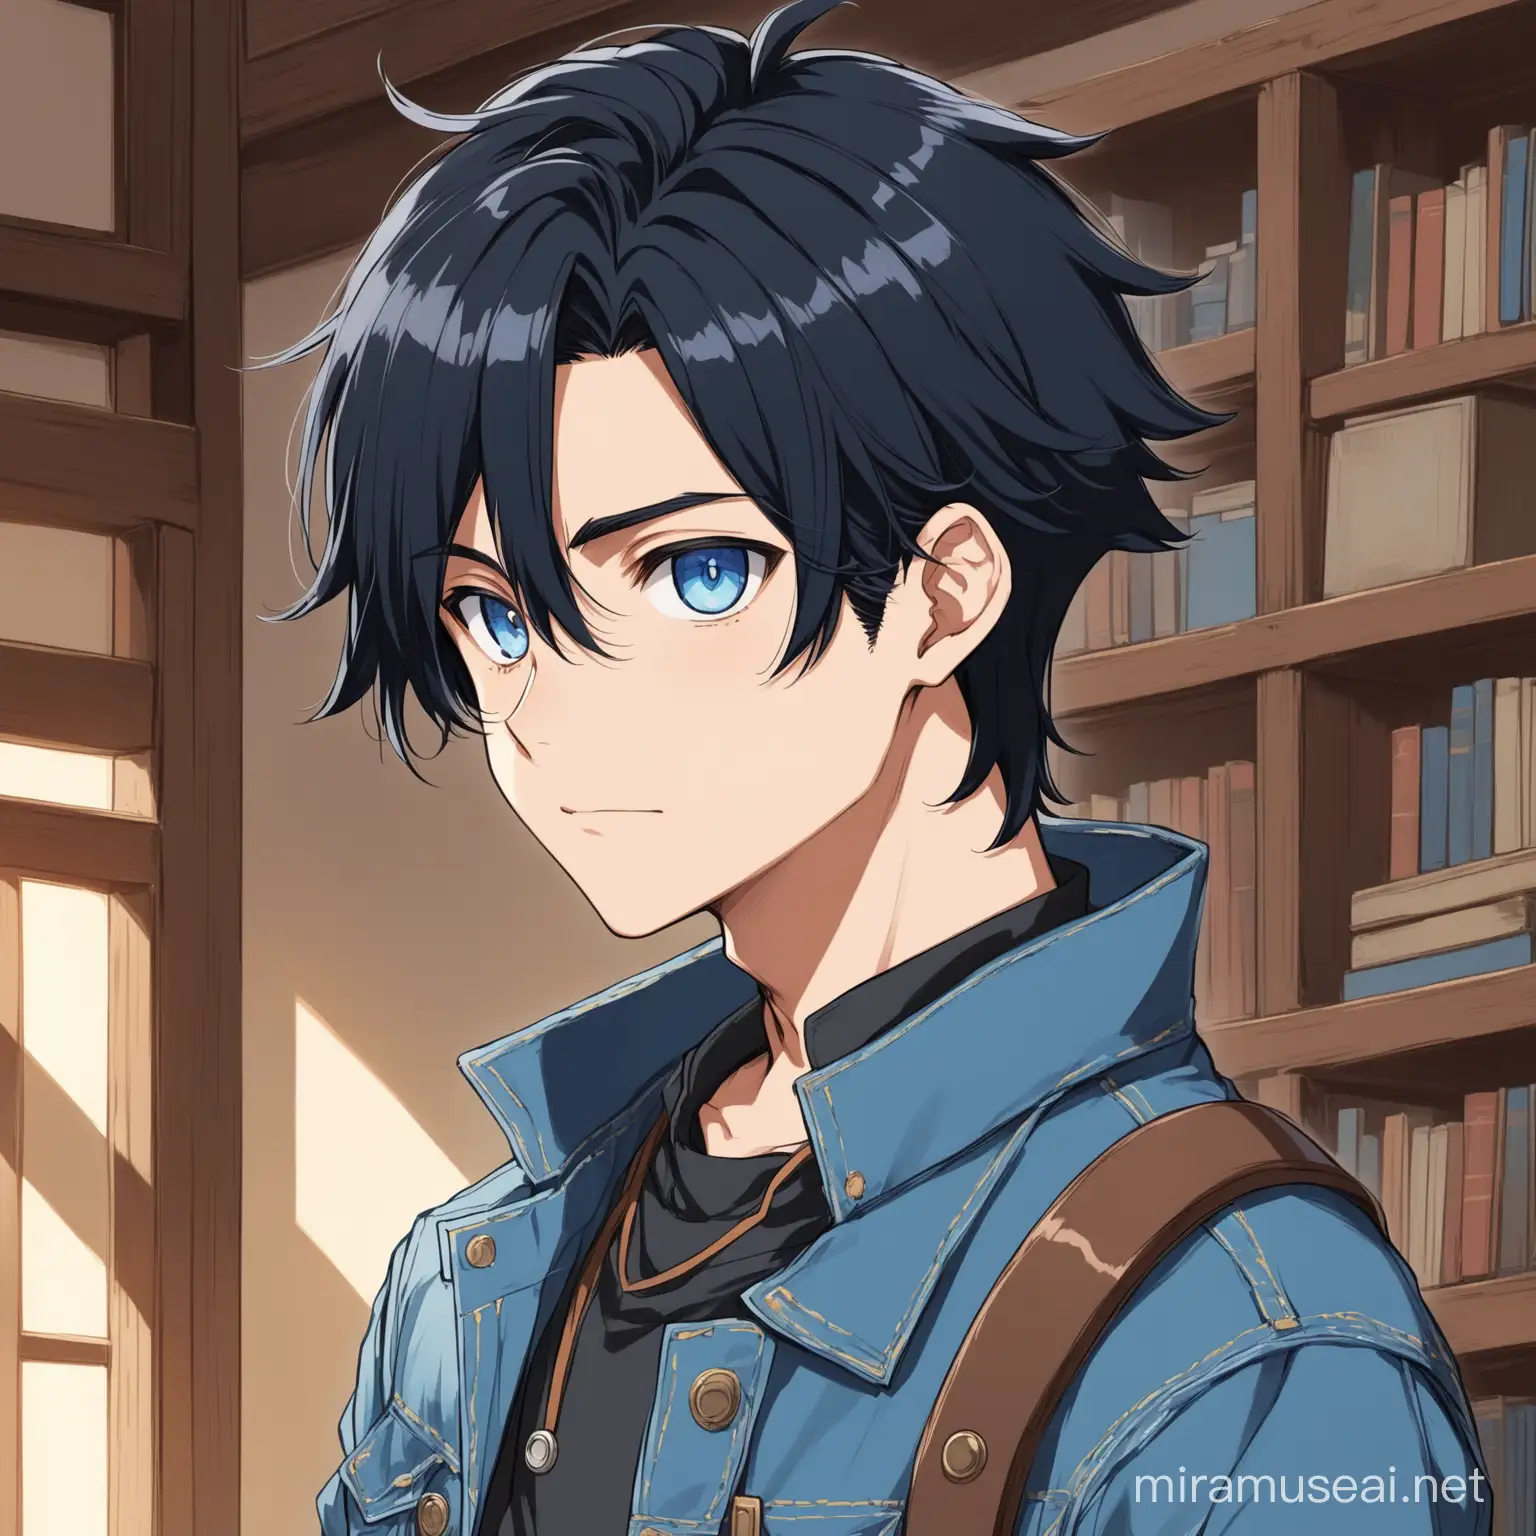 Anime-style artificer boy with black hair, blue eyes, and a denim jacket